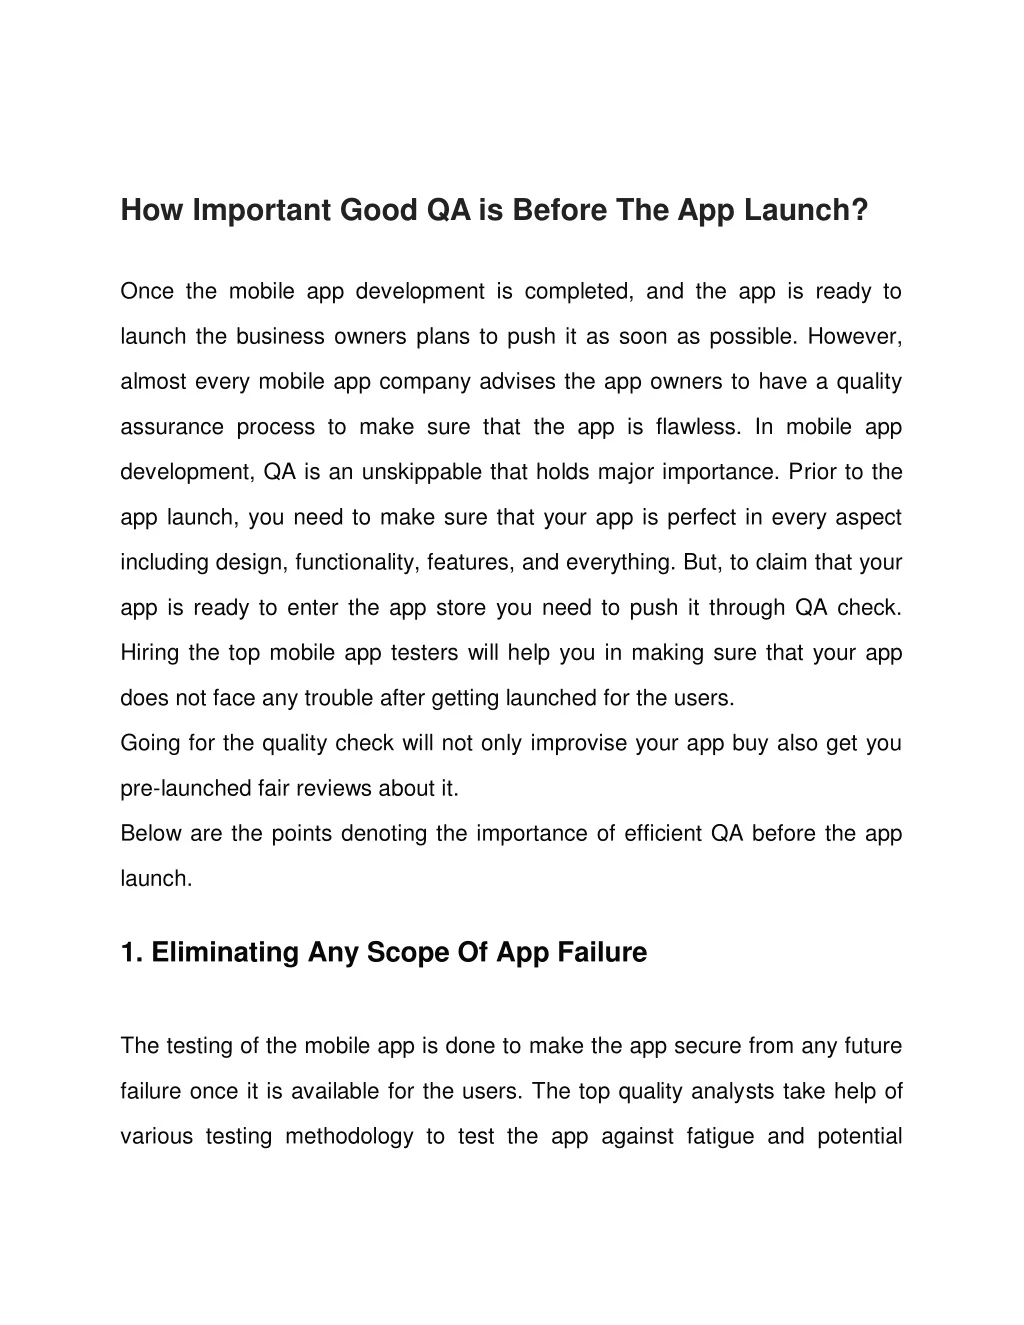 how important good qa is before the app launch